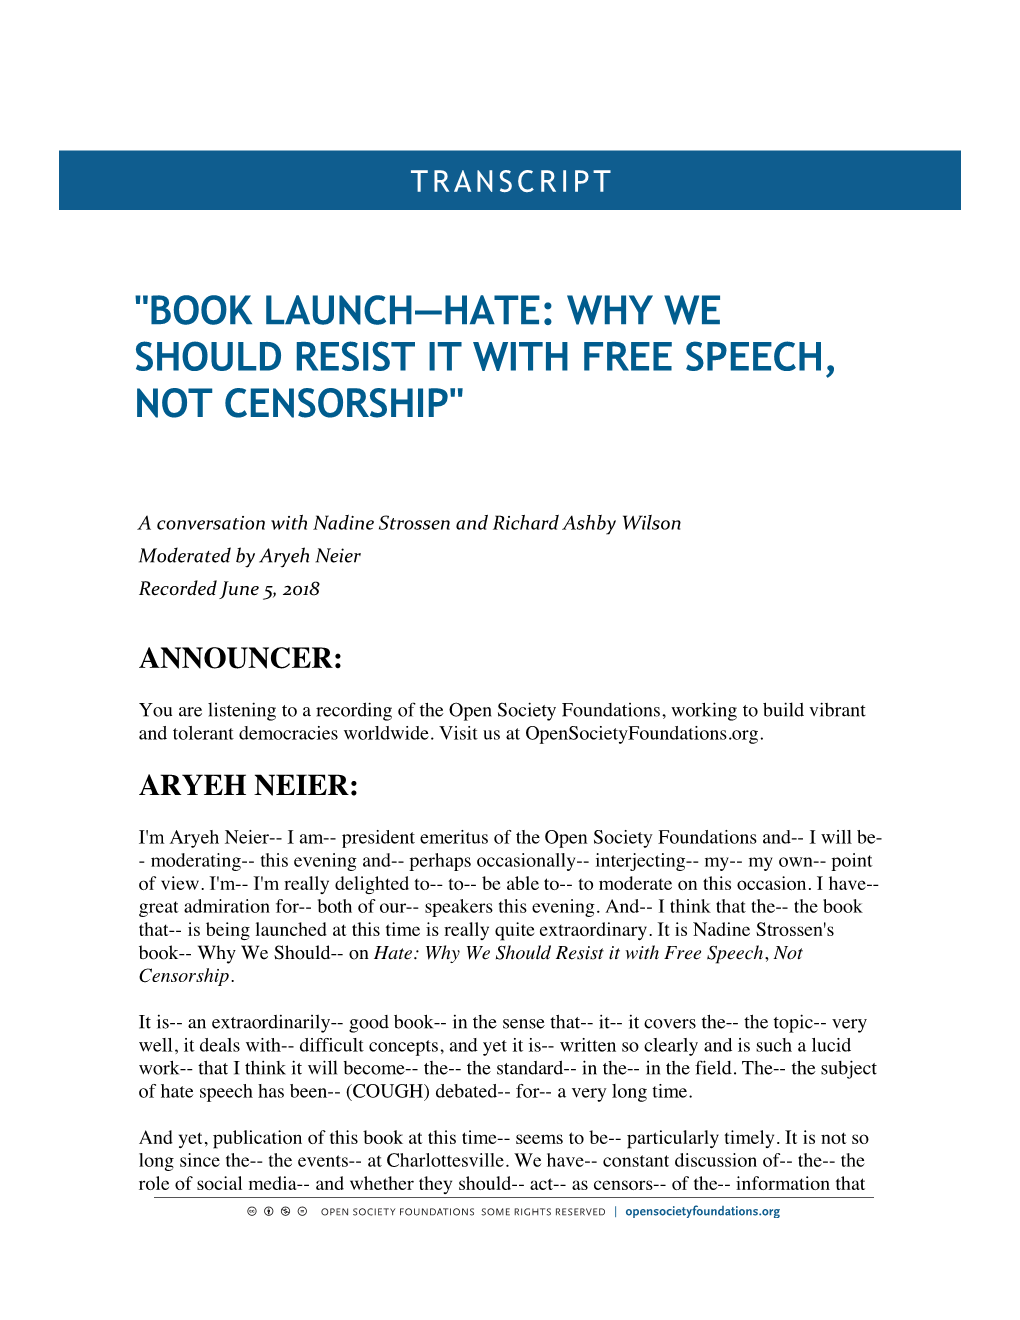 "Book Launch—Hate: Why We Should Resist It with Free Speech, Not Censorship"